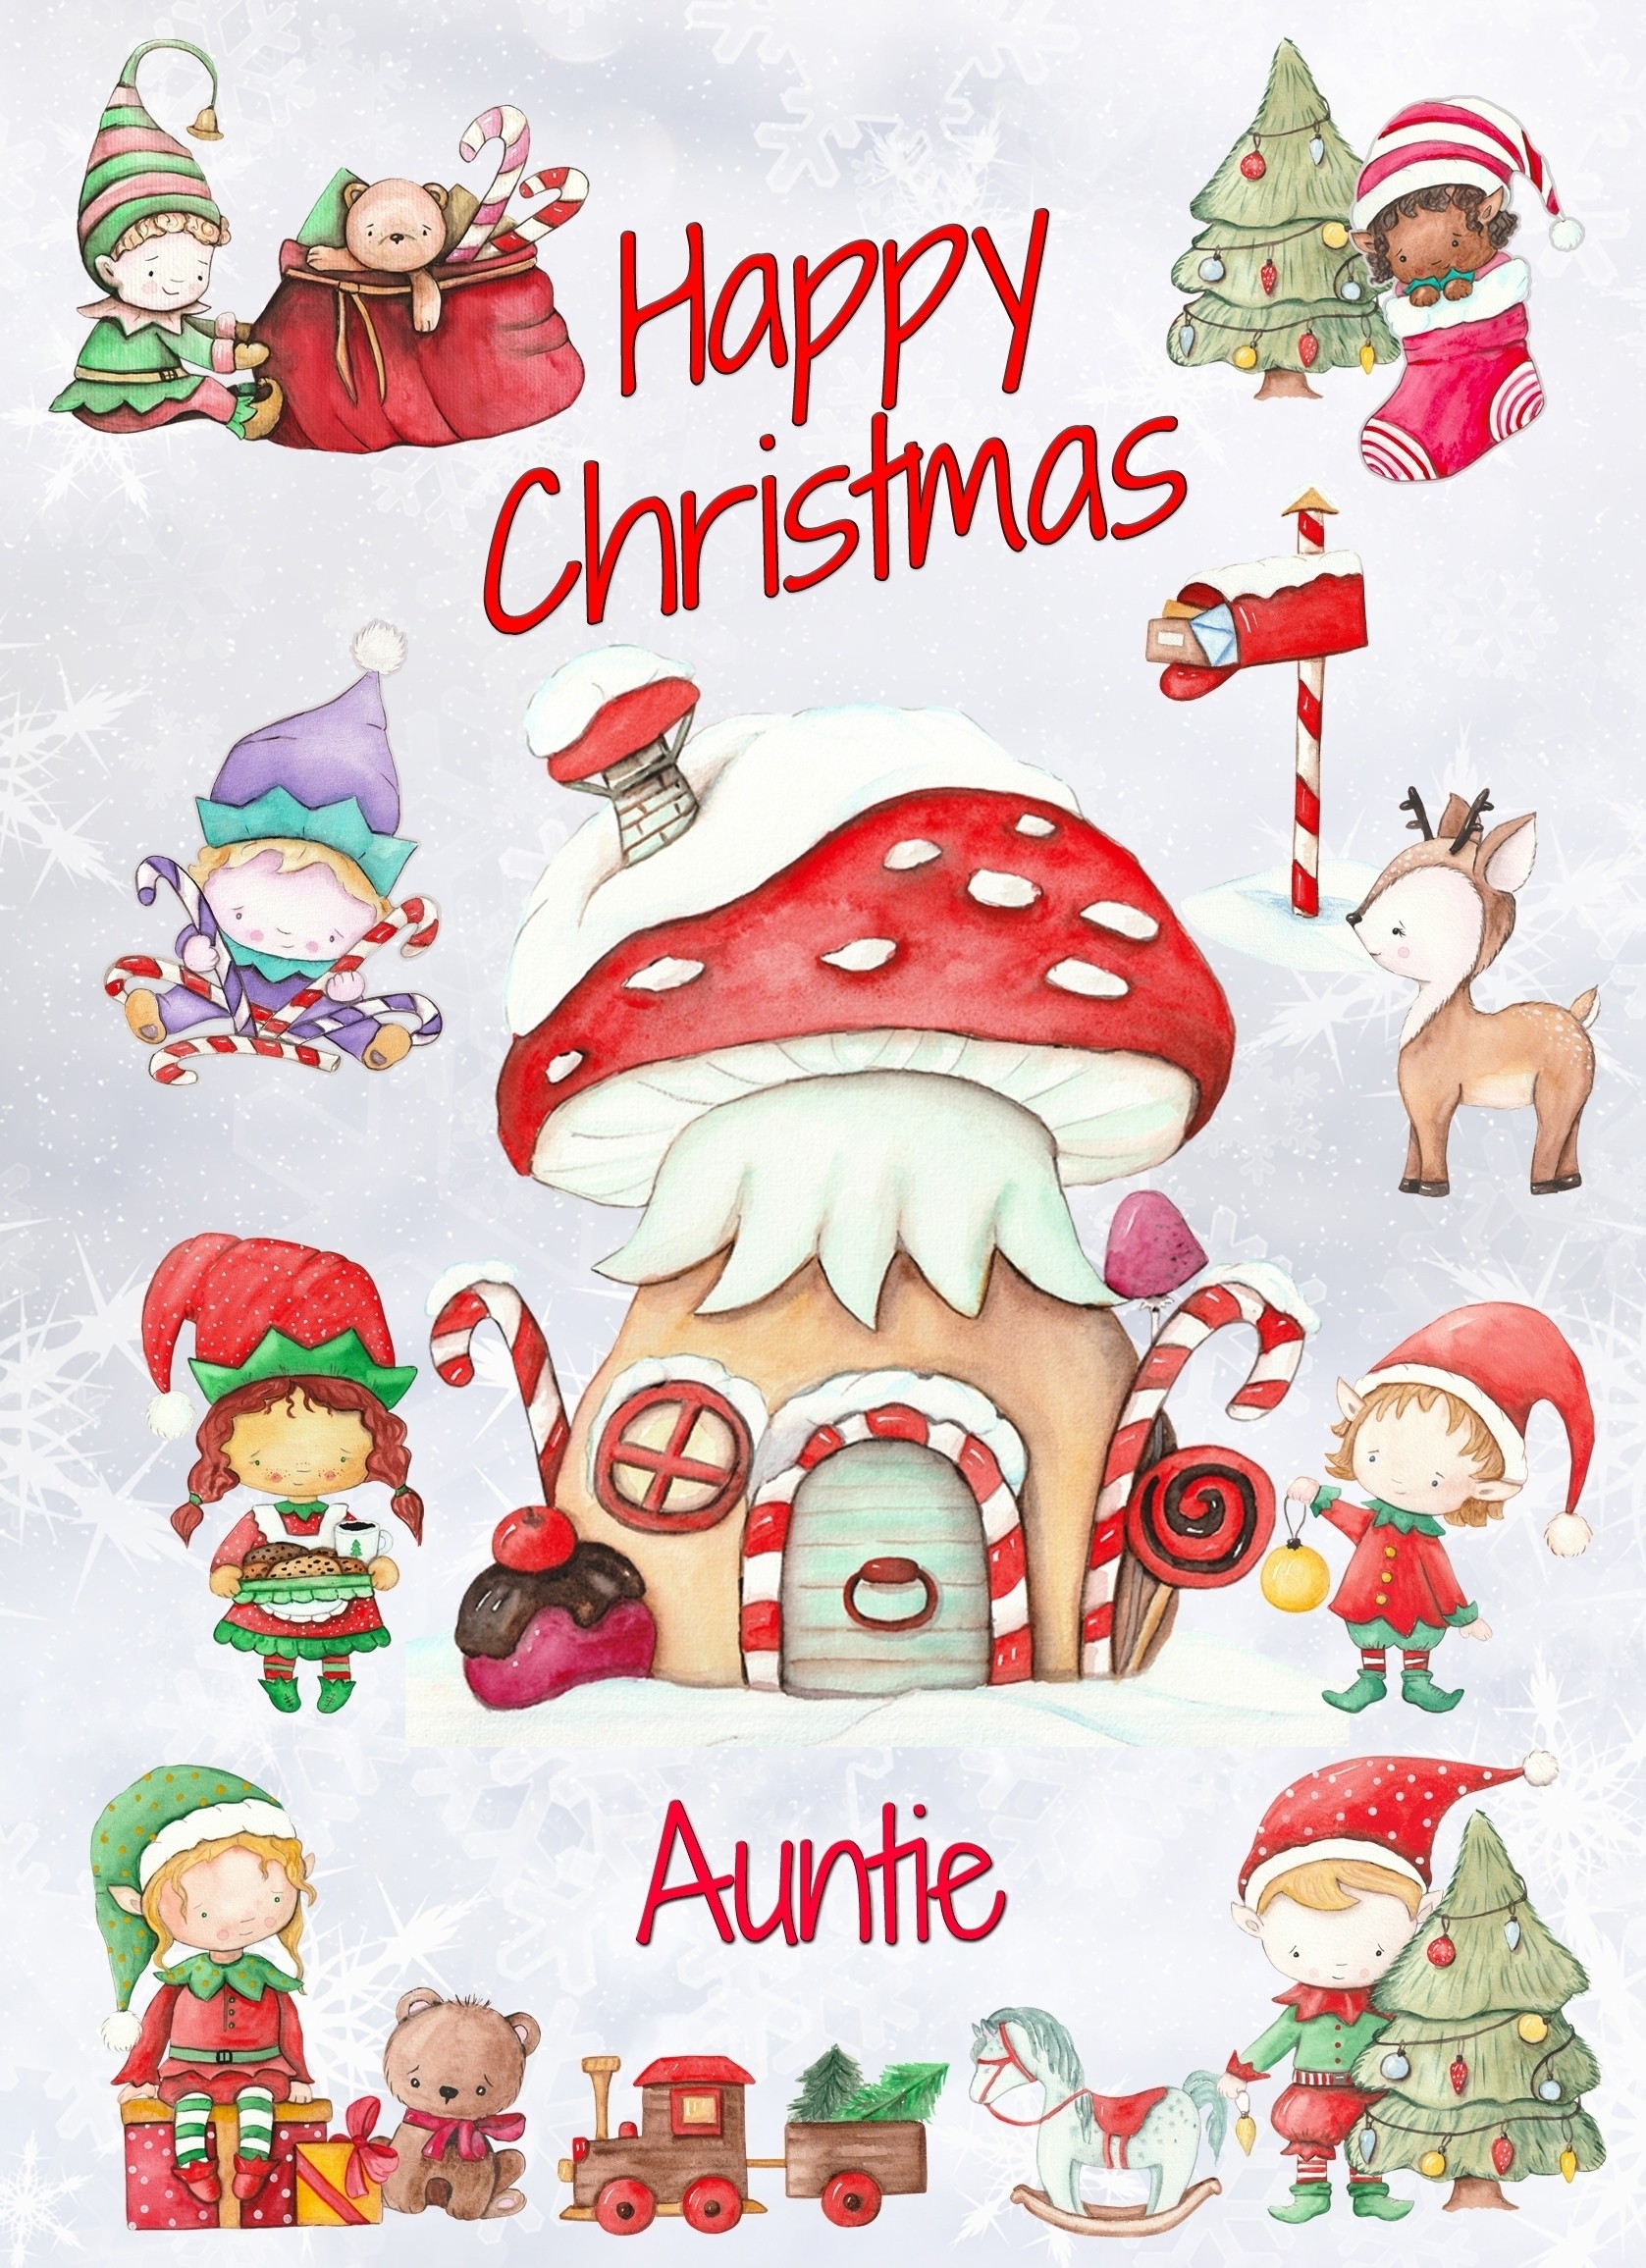 Christmas Card For Auntie (Elf, White)